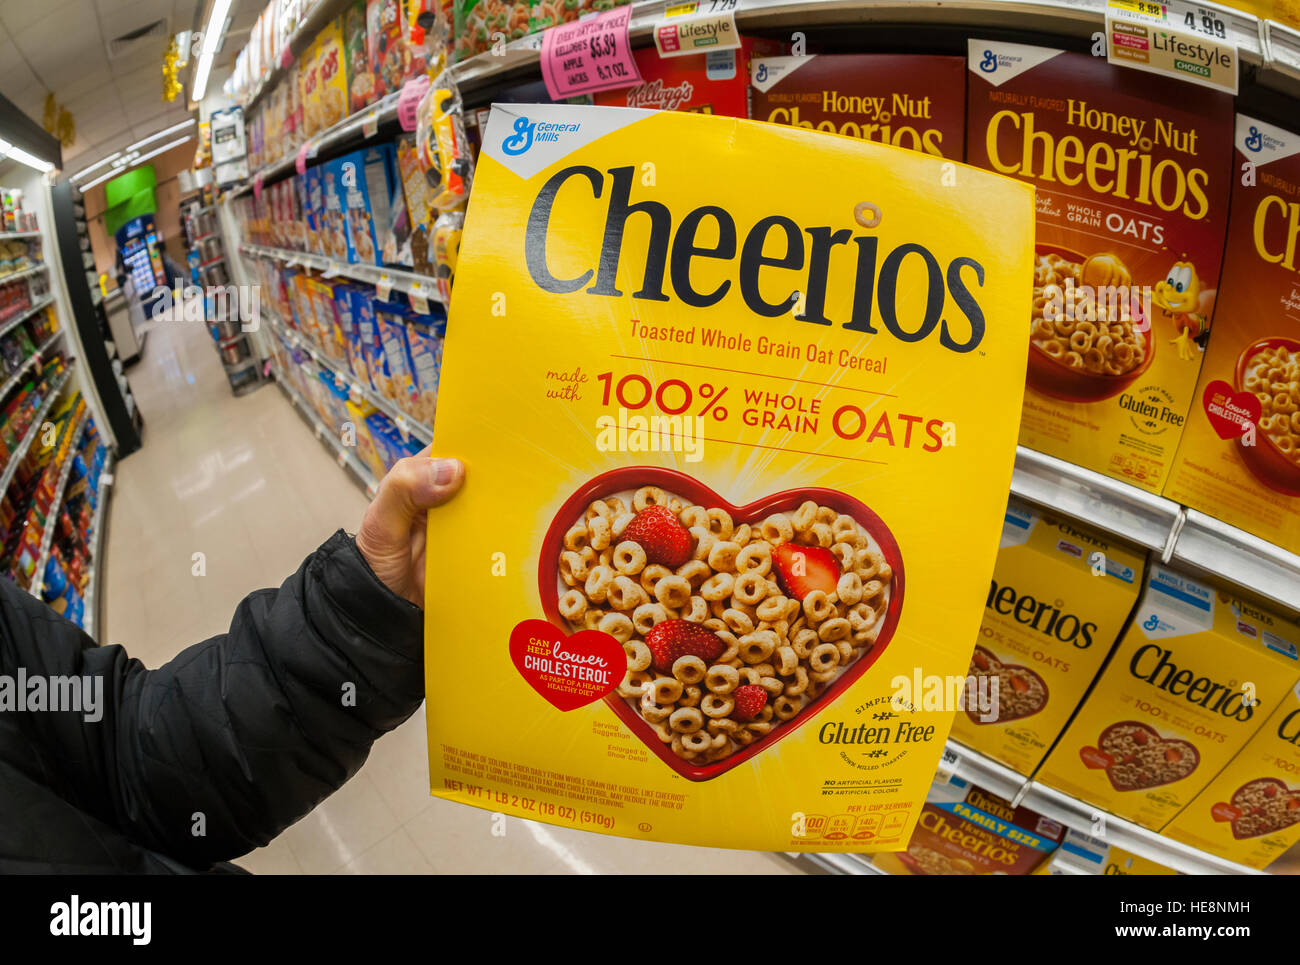 A shopper chooses a package of General Mills' Cheerios breakfast cereal in a supermarket in New York on Friday, December 16, 2016. General Mills is to report its second-quarter results on December 20. (© Richard B. Levine) Stock Photo